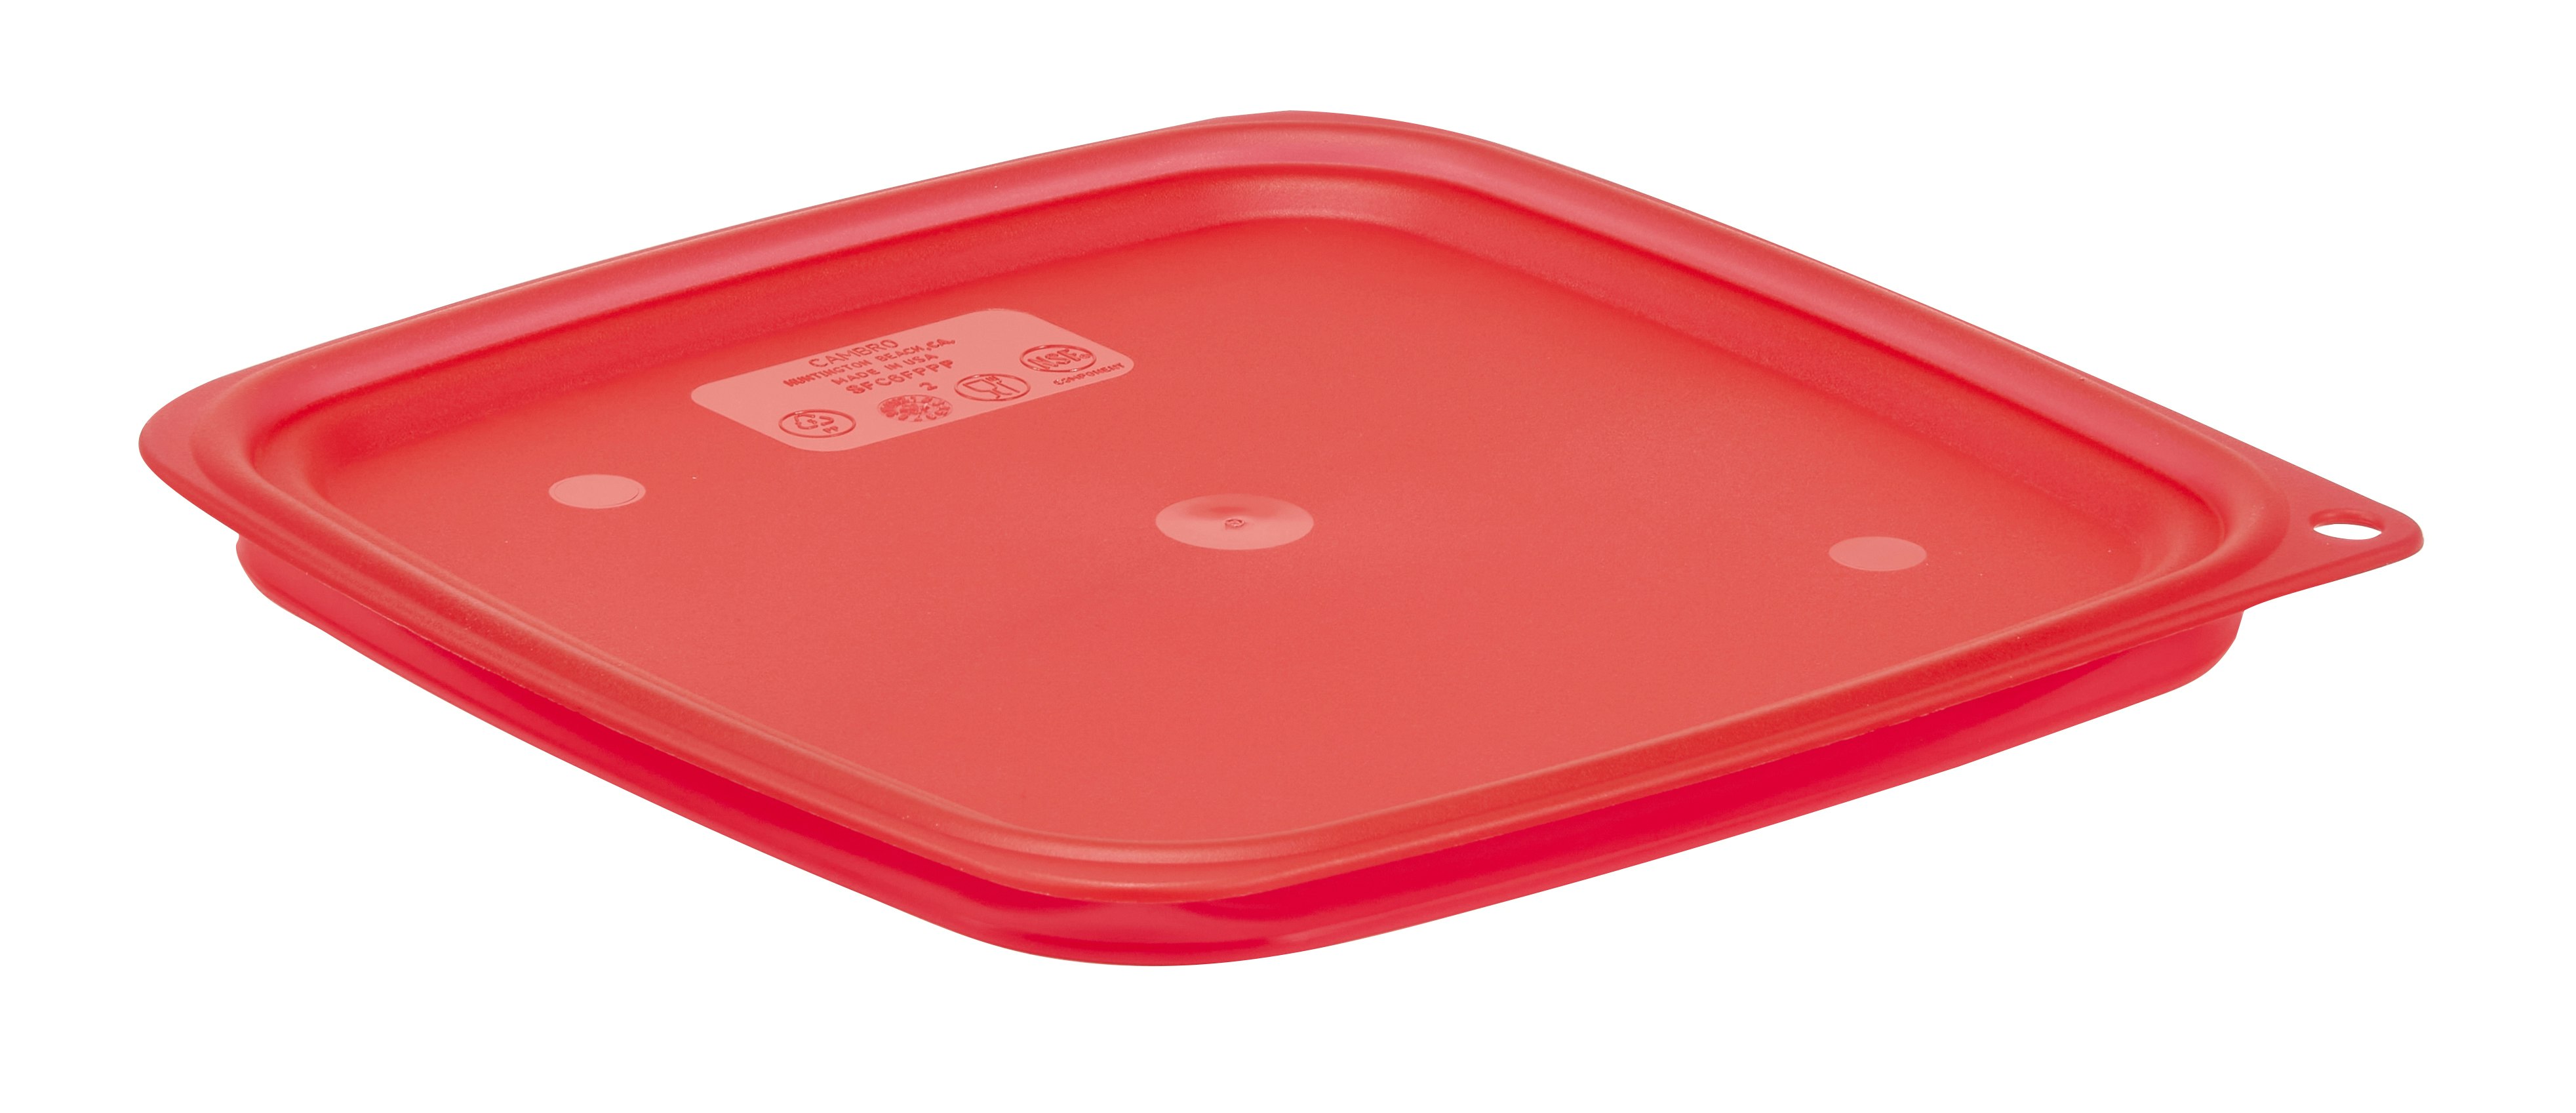 https://cambro-dam.imgix.net/W9JOI01Y/at/c396r32g6q84n3wk6t94q/Red_Lid_Angle.jpg?dl